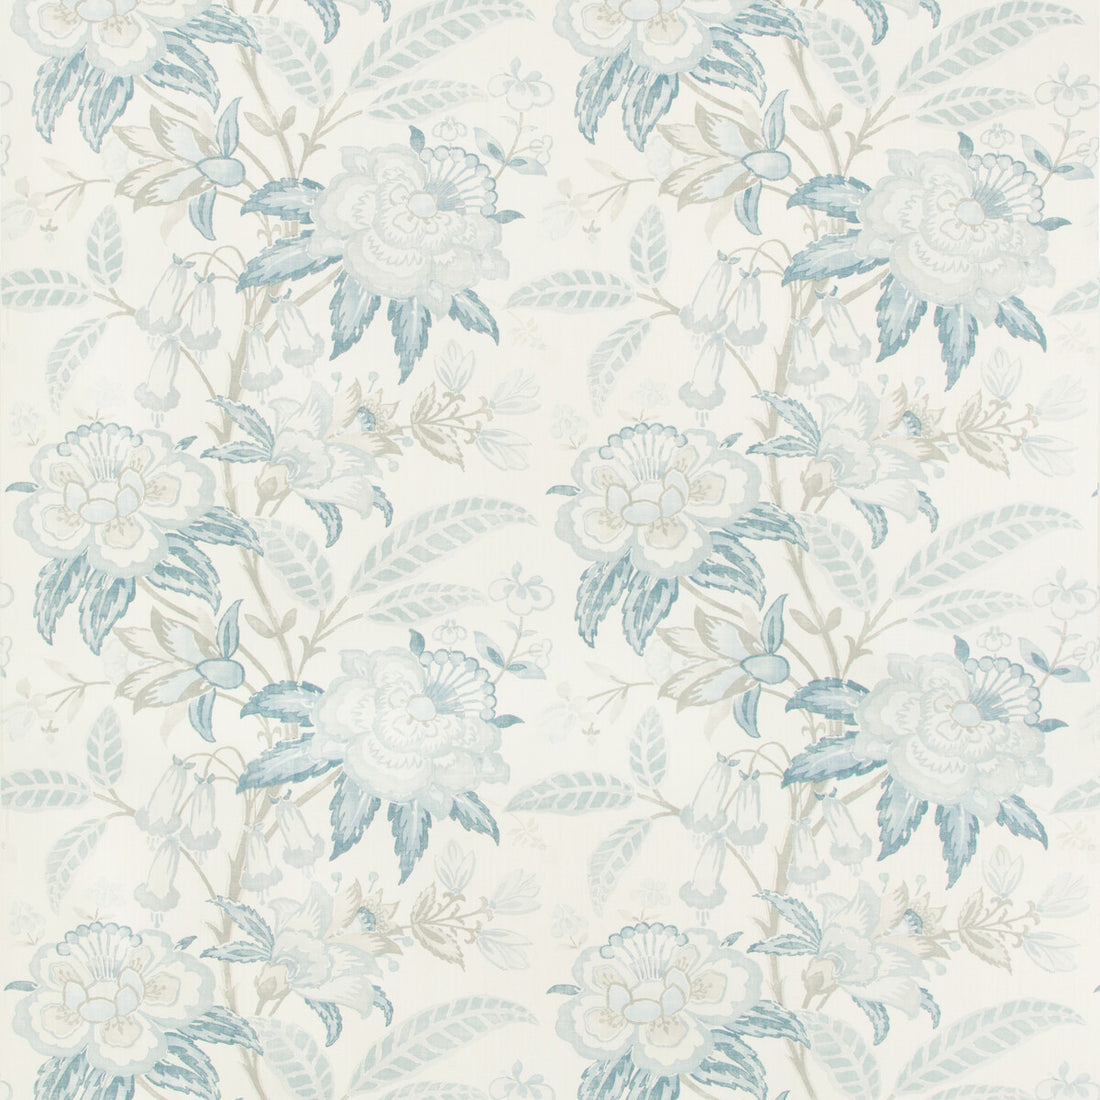 Davenport Print fabric in frost blue color - pattern 2017164.115.0 - by Lee Jofa in the Westport collection